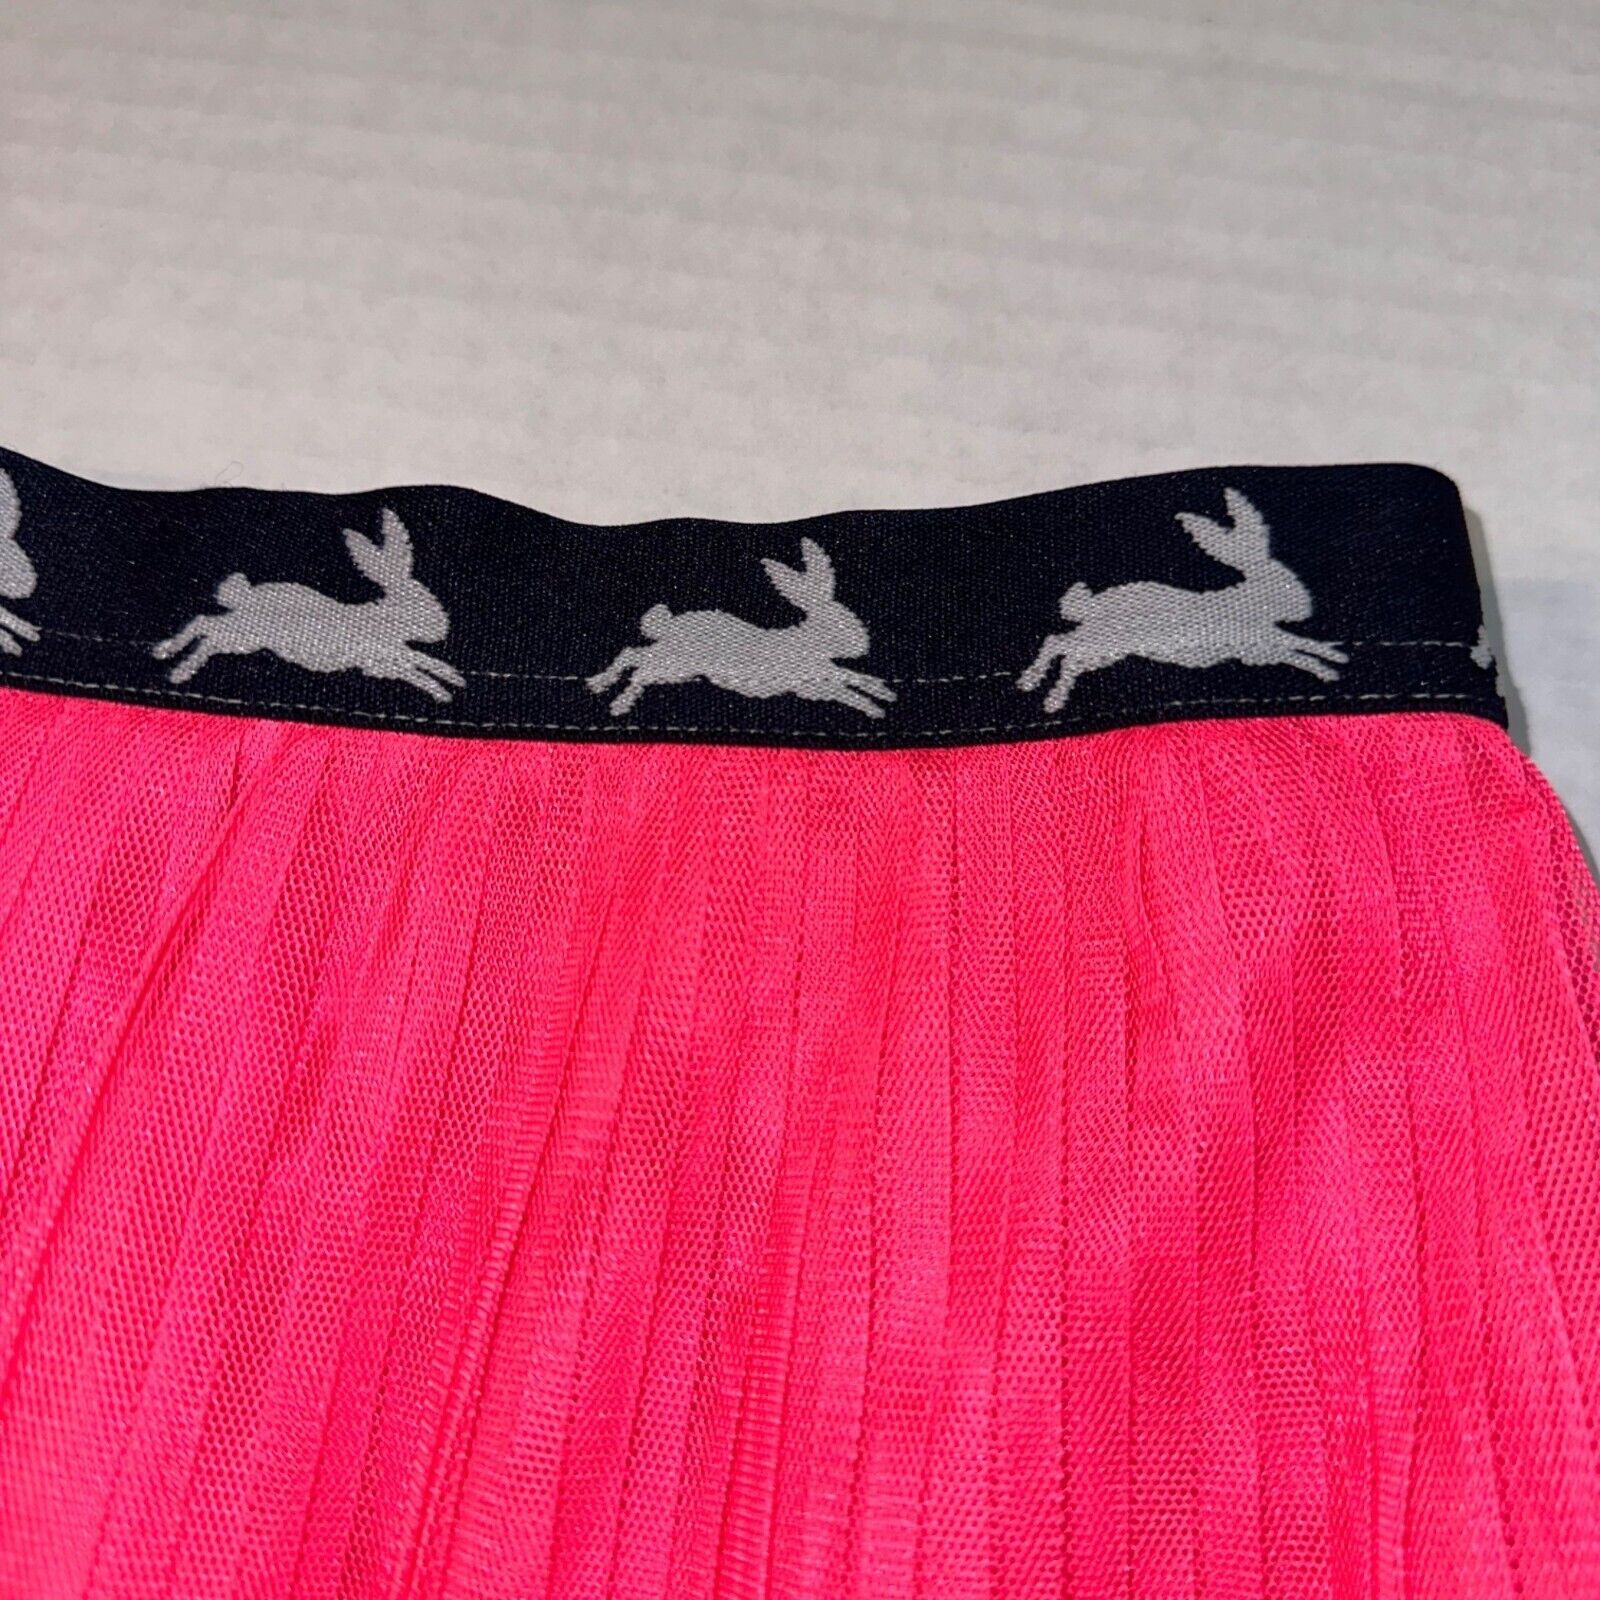 Primary image for GAP Kids Sarah Jessica Parker Collab Girls Pink Tutu Pull On Skirt, Size XXL